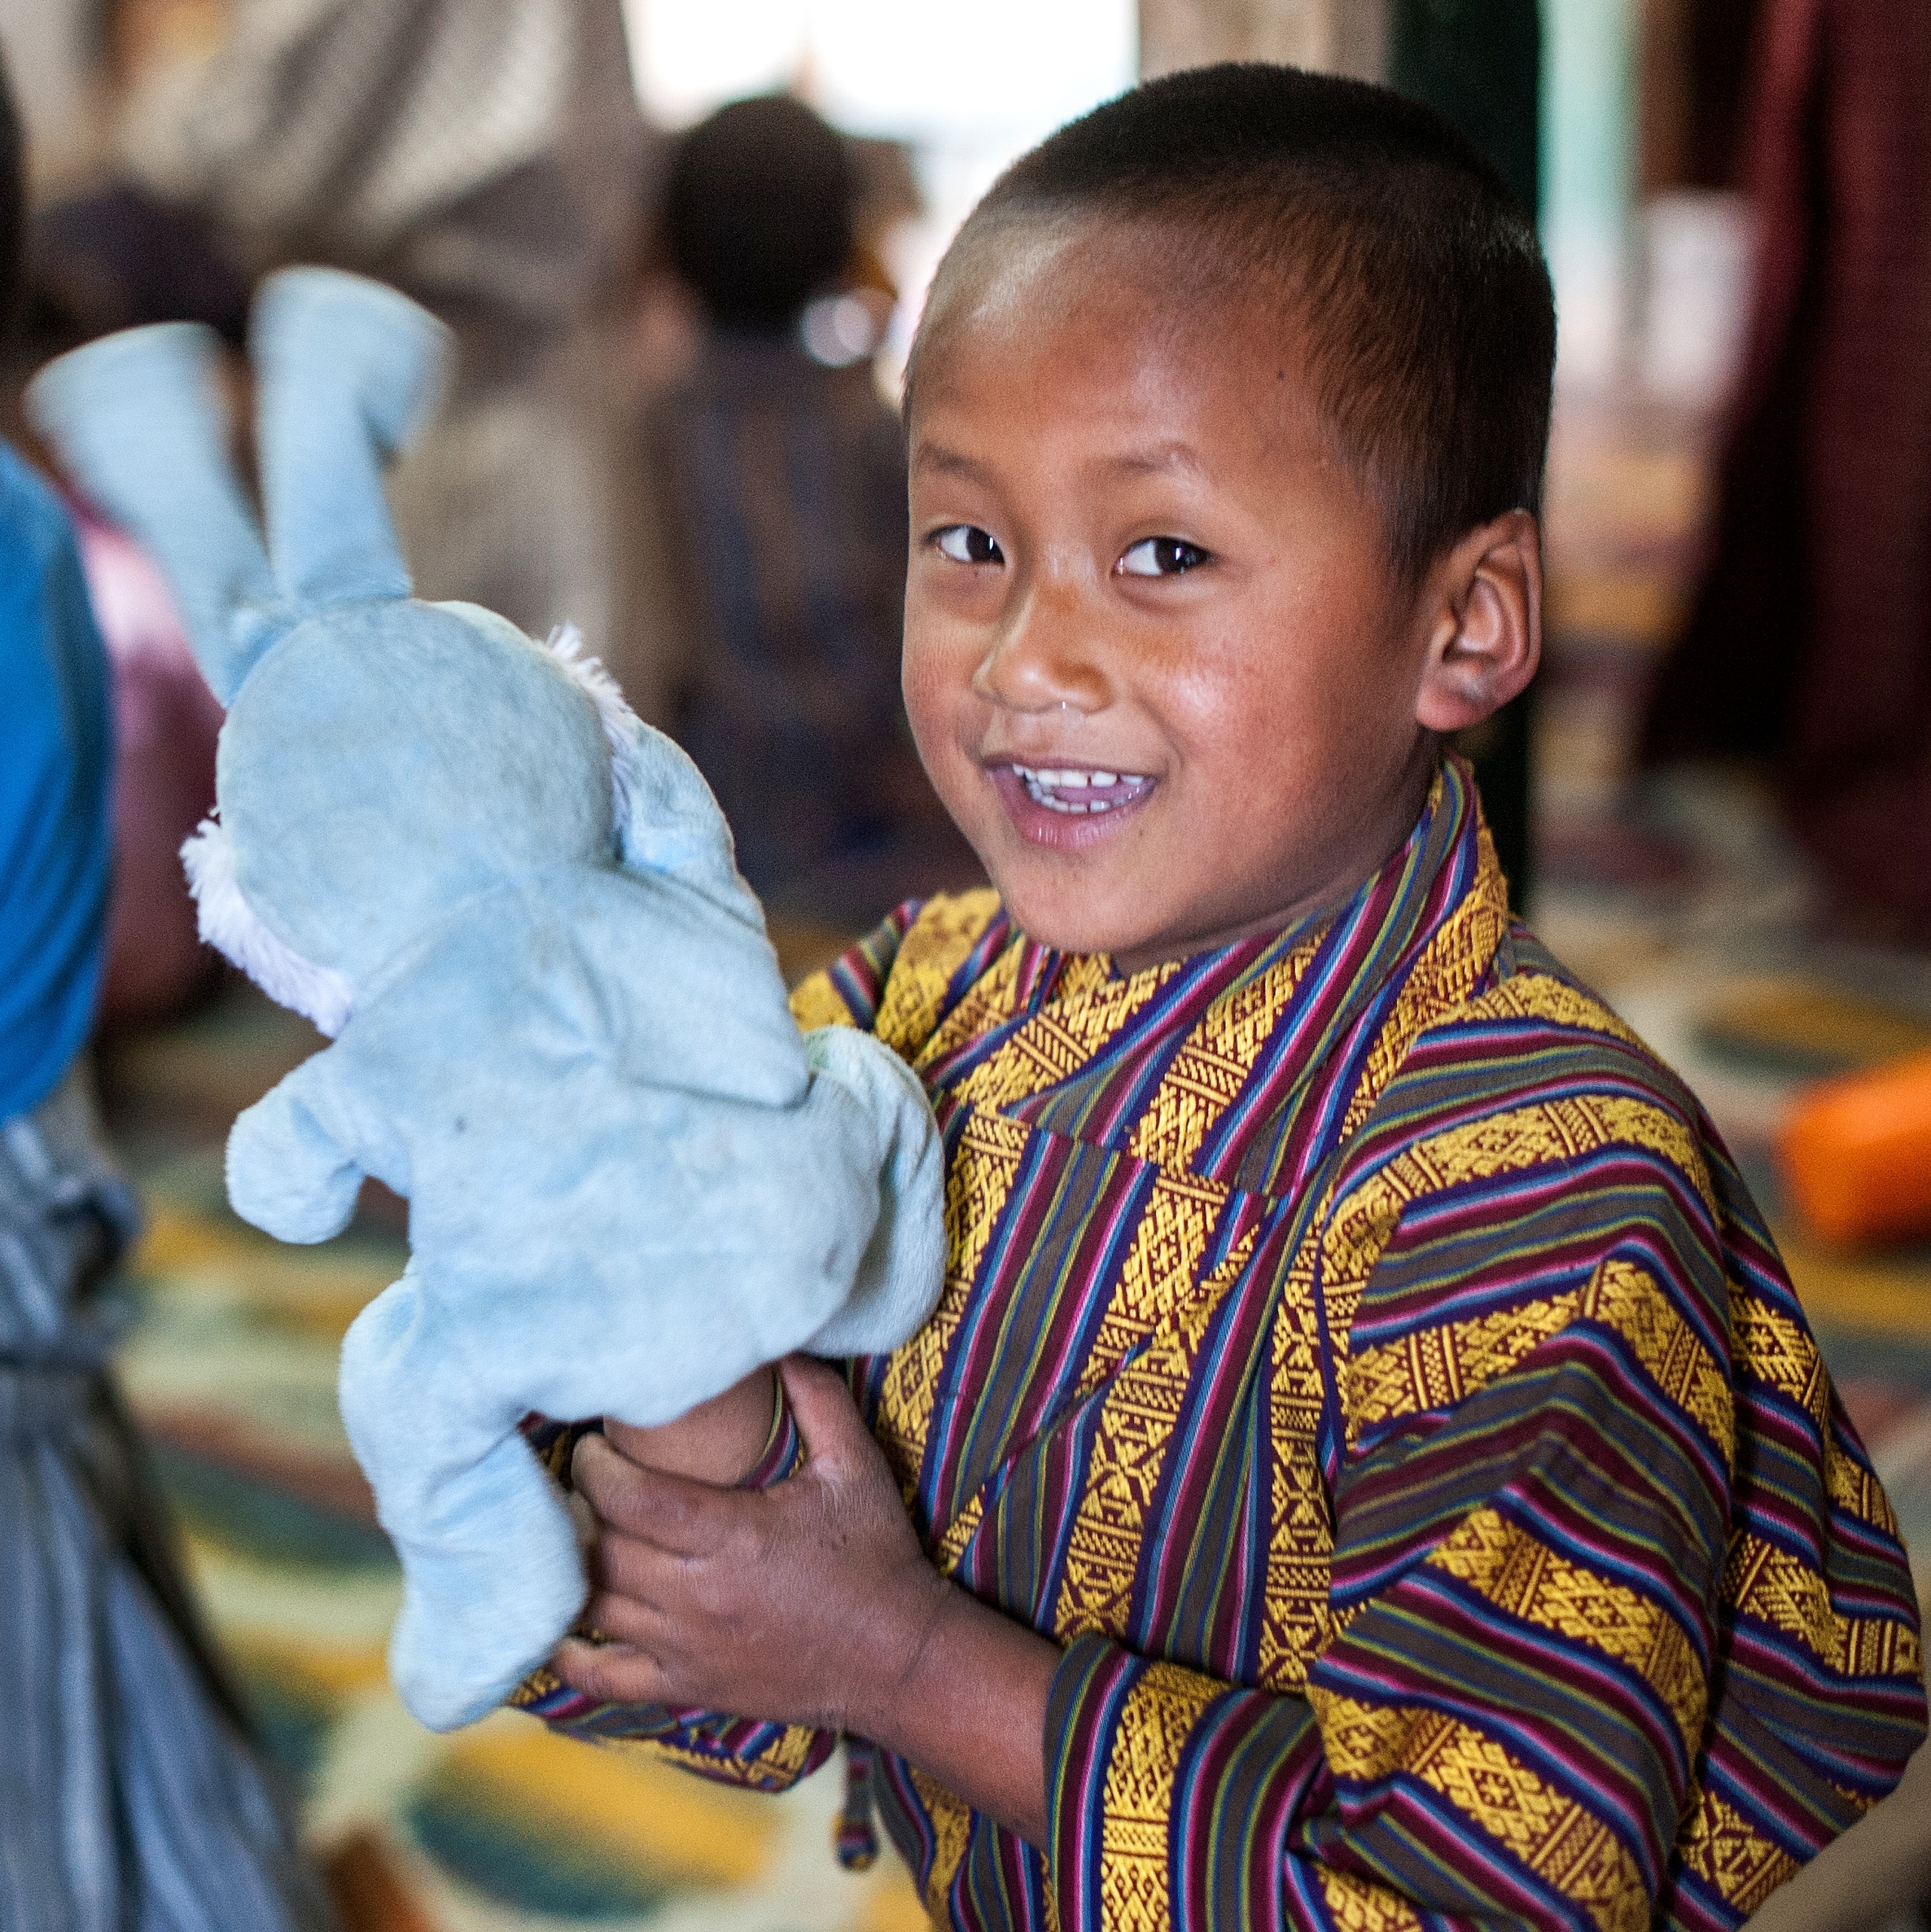 Pema smiles for the camera and holds up a rabbit stuffed animal. He and his friend Chimi are using their imaginations in a learning corner, set up at a preschool in Bhutan. The Red Nose Day Fund helped Save the Children improve the quality of education in more than 200 preschools in Bhutan, training teachers to incorporate play-based math and reading activities that help increase school readiness. Photo credit: Susan Warner/Save the Children, March 2016. 